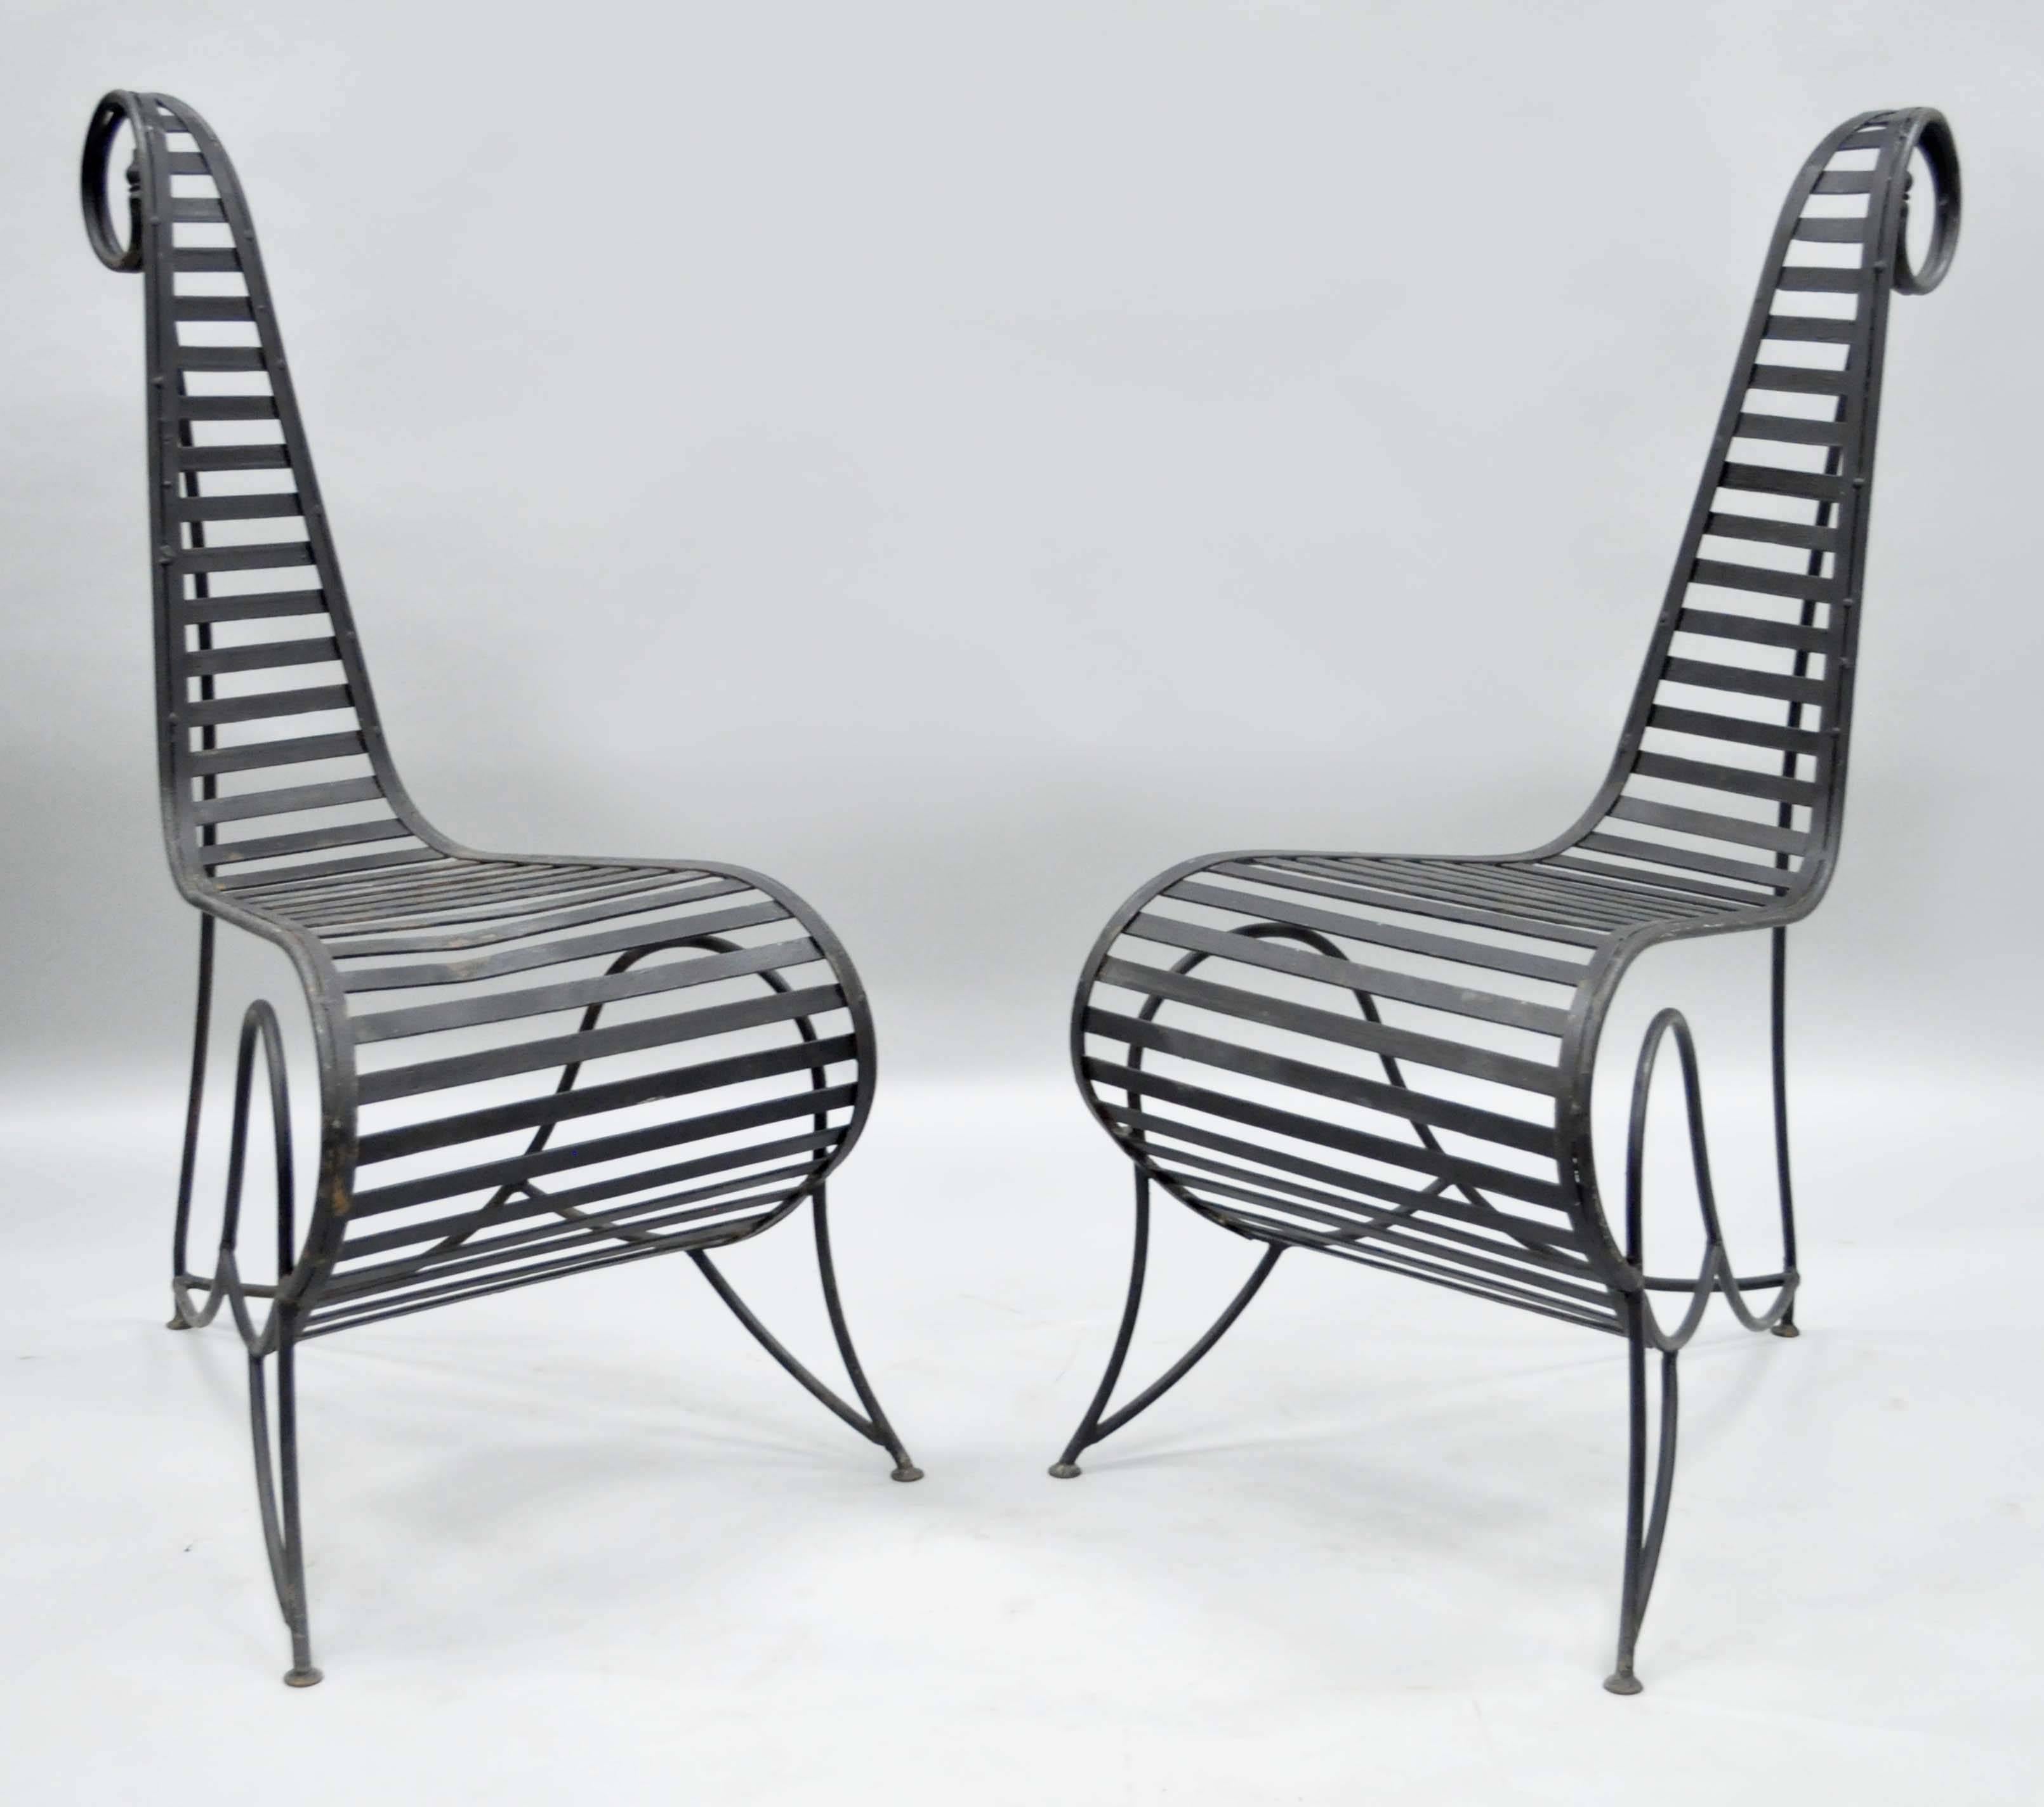 Pair of Vintage Whimsical Steel Iron Spine Lounge Chairs after André Dubreuil 2